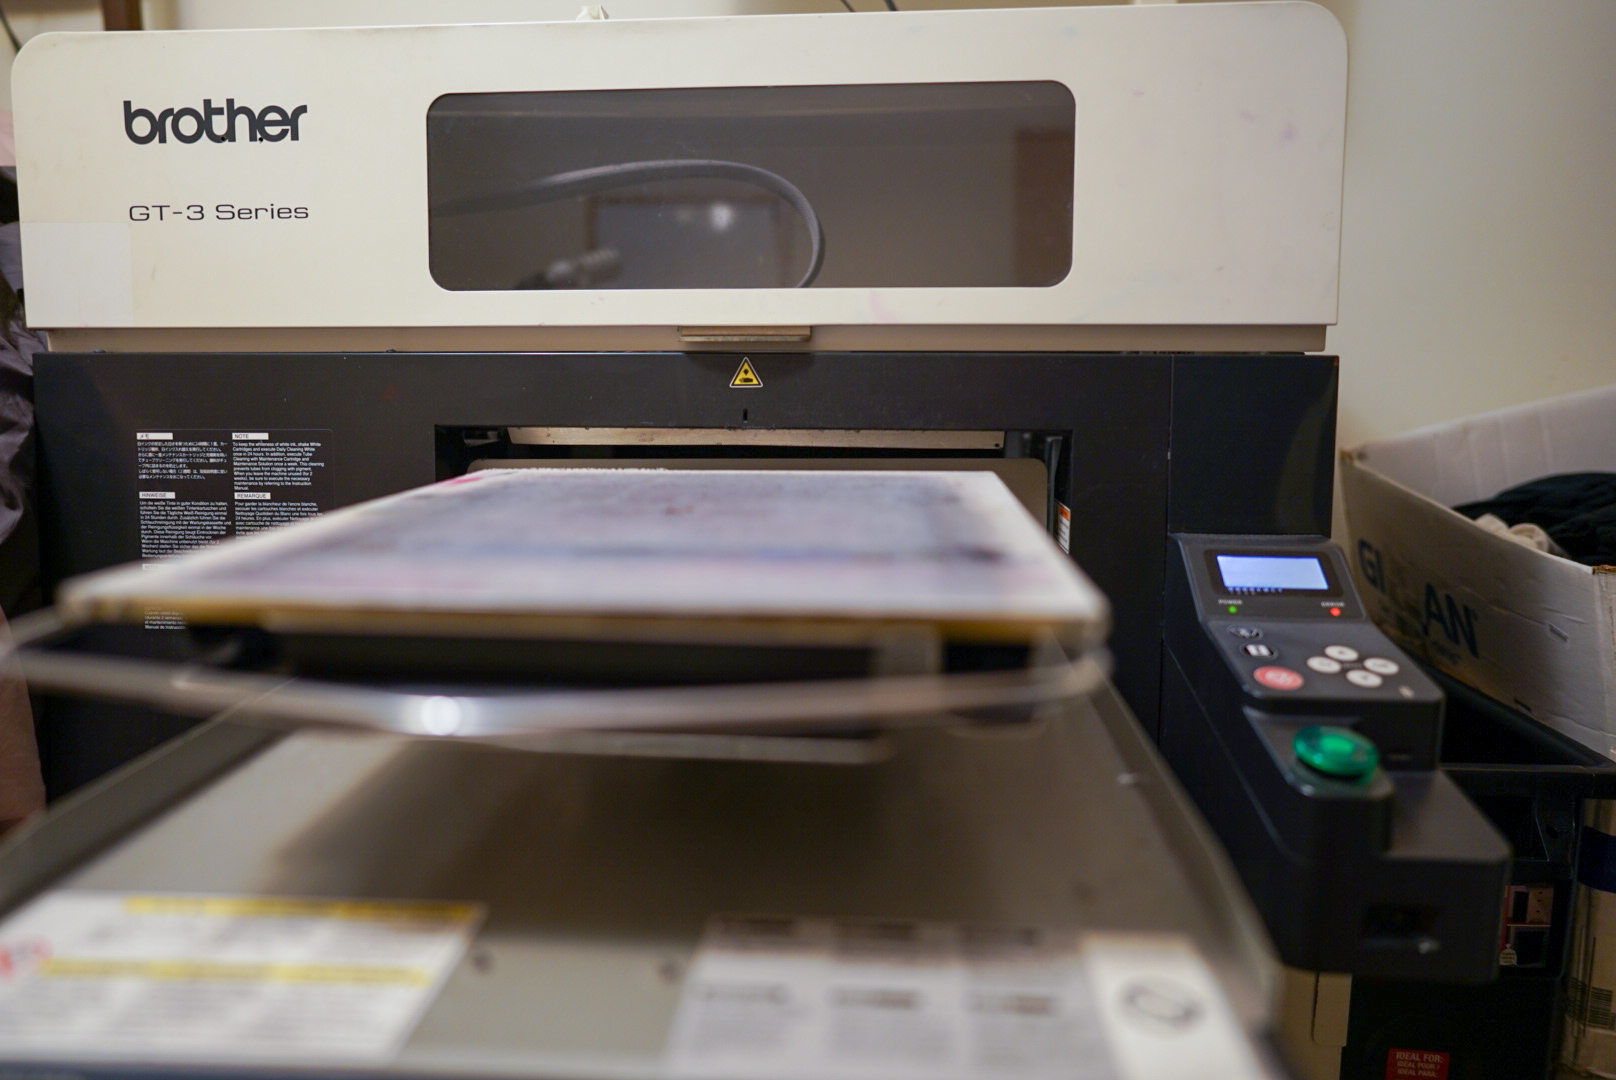 Image of a DTG Printer owned by Need T-shirts Now